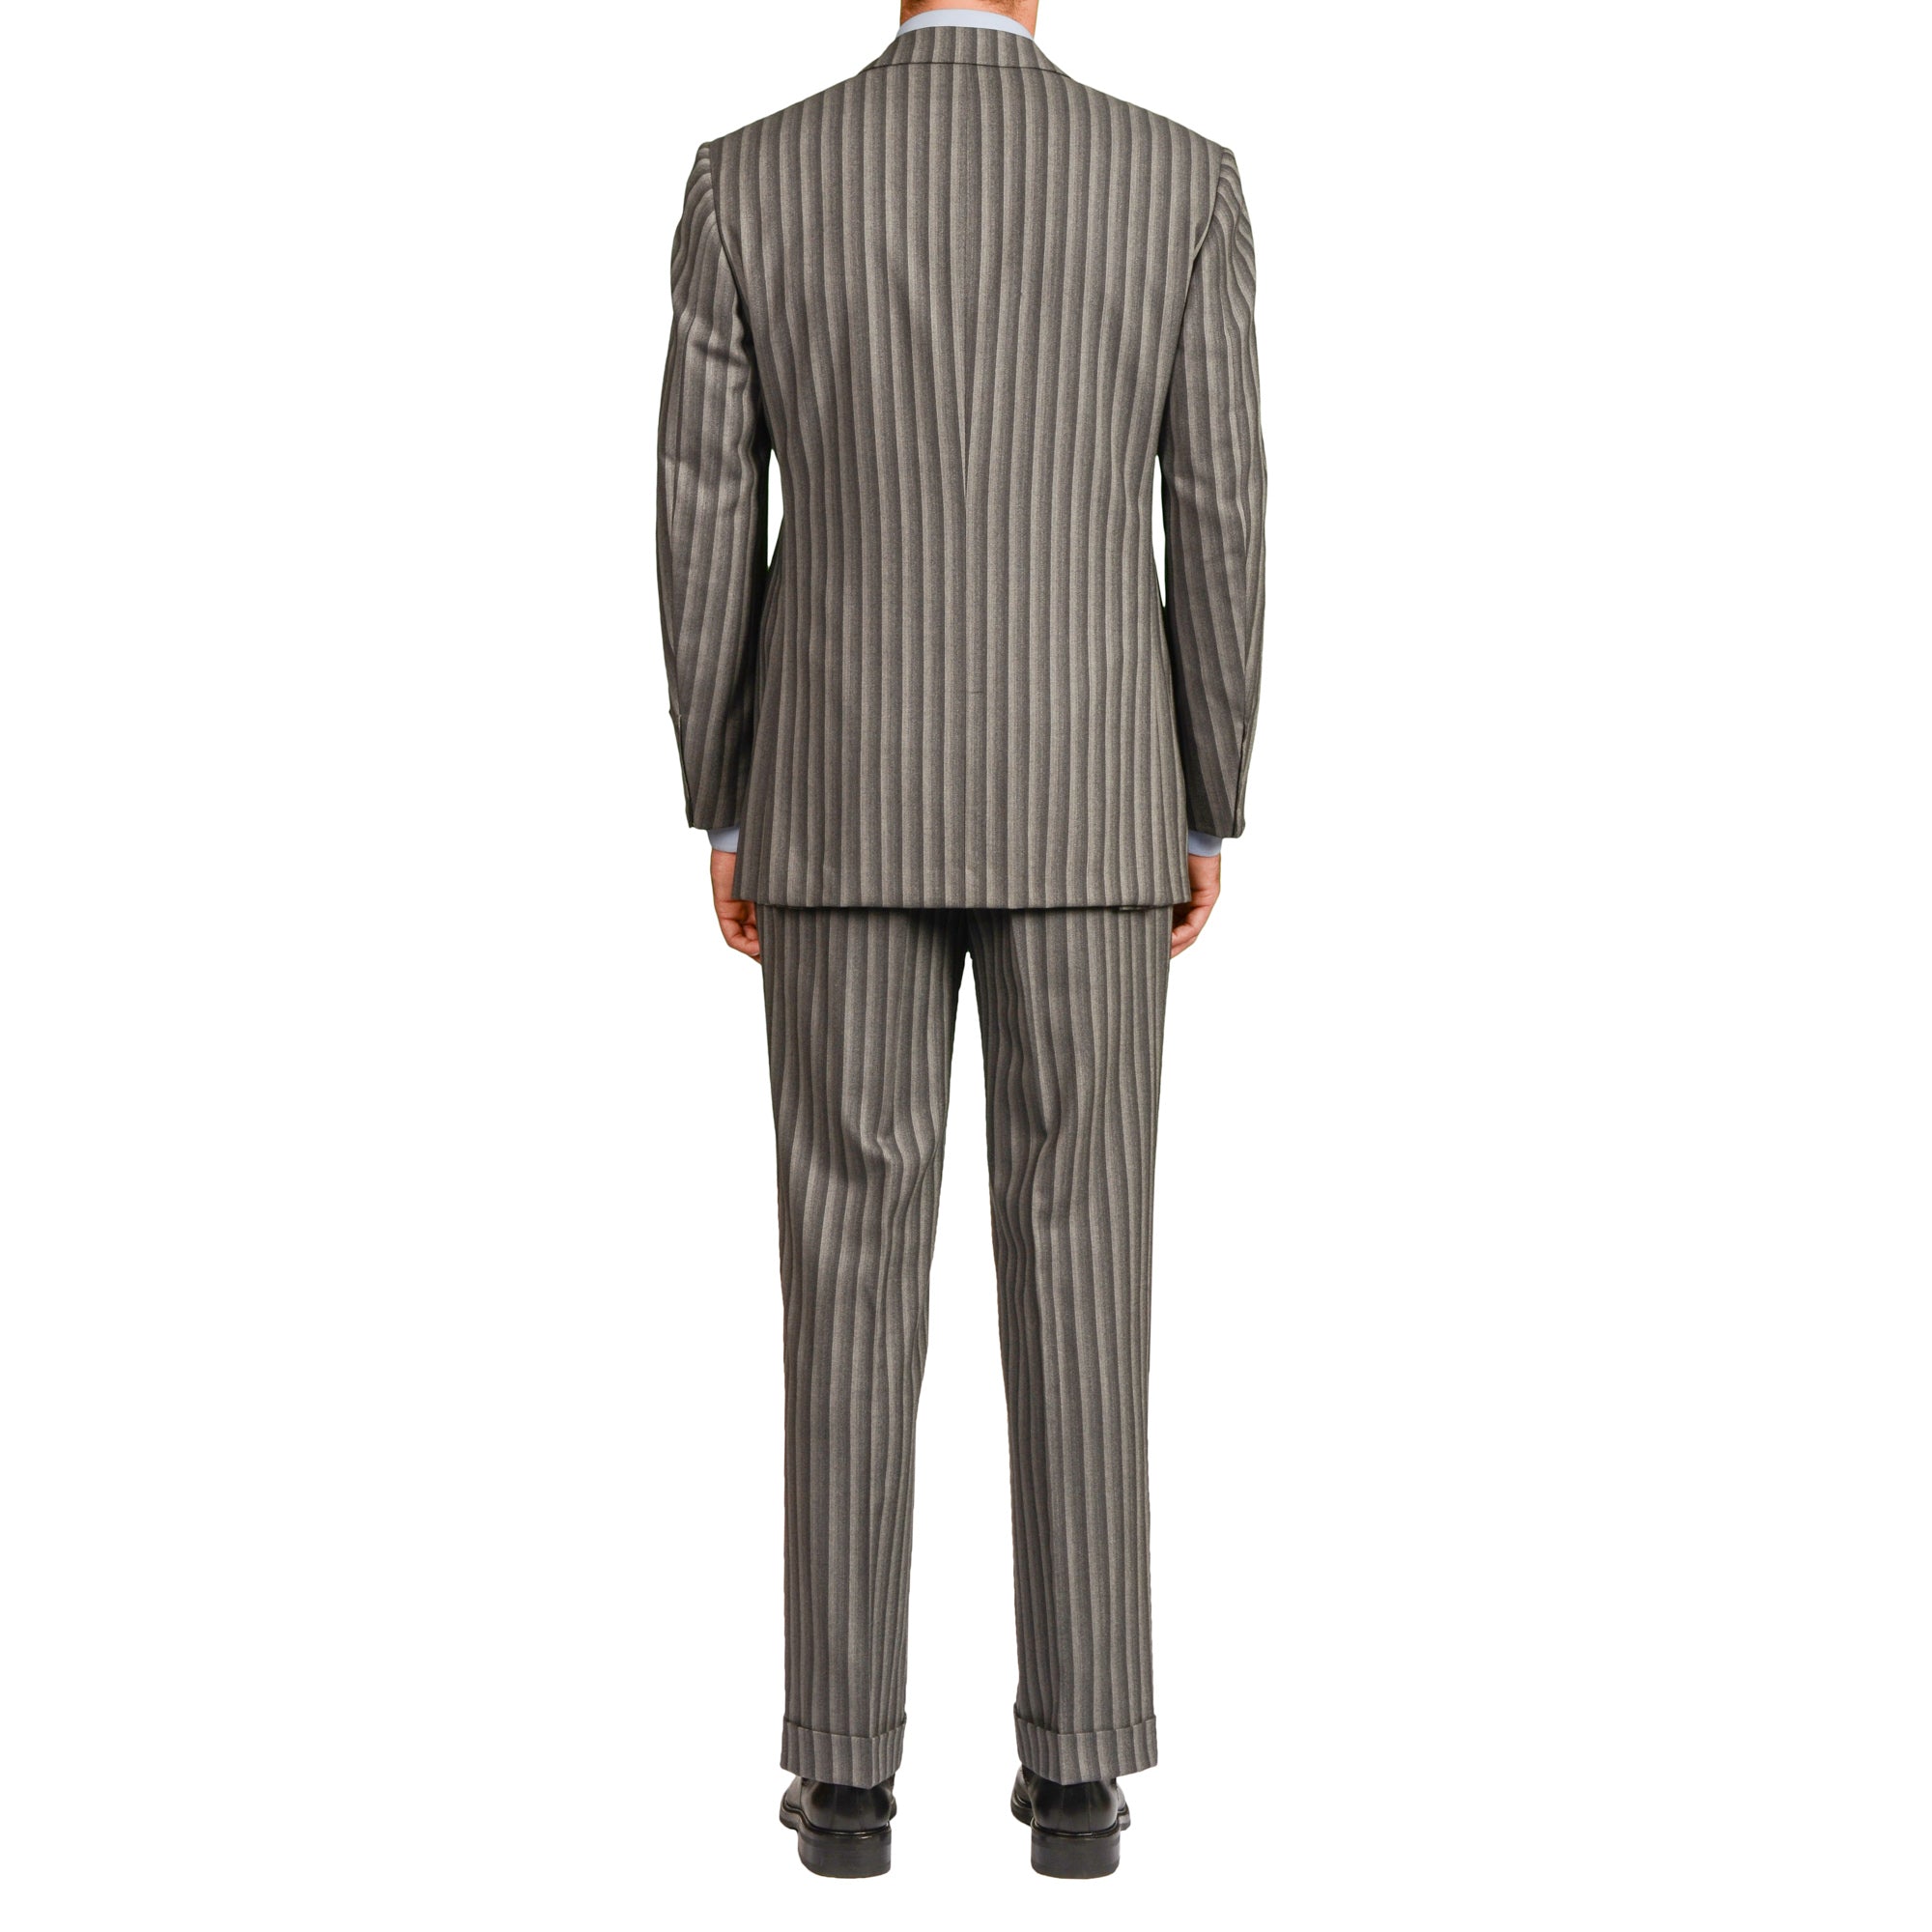 D'AVENZA Roma Handmade Gray Striped Wool-Cashmere Suit EU 50 NEW US 40 D'AVENZA